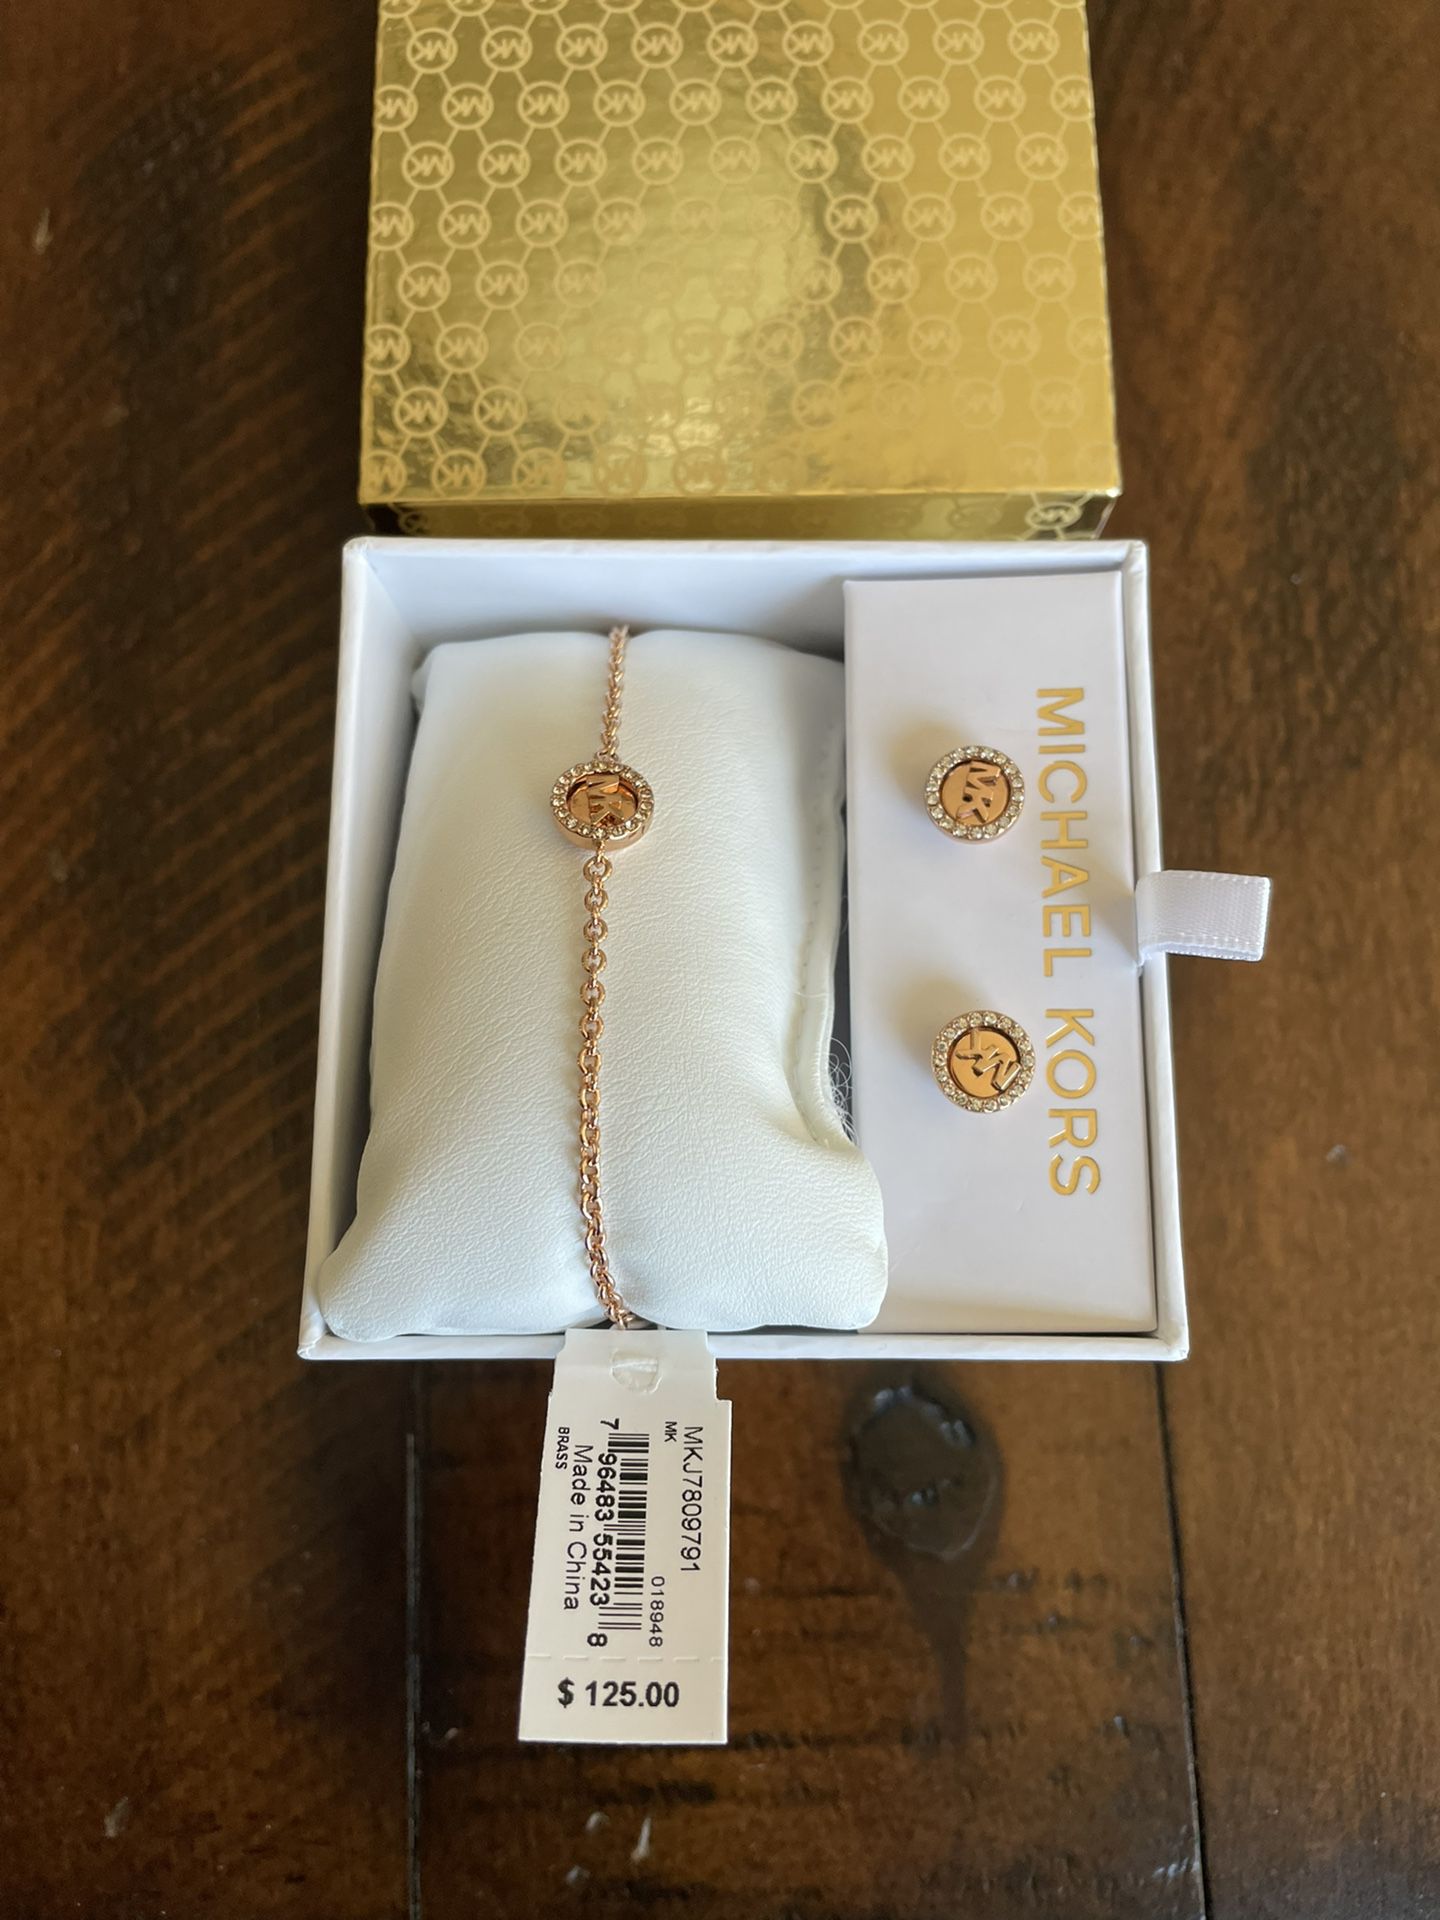 New In Box With Tags MICHAEL KORS Jewelry Set In Box